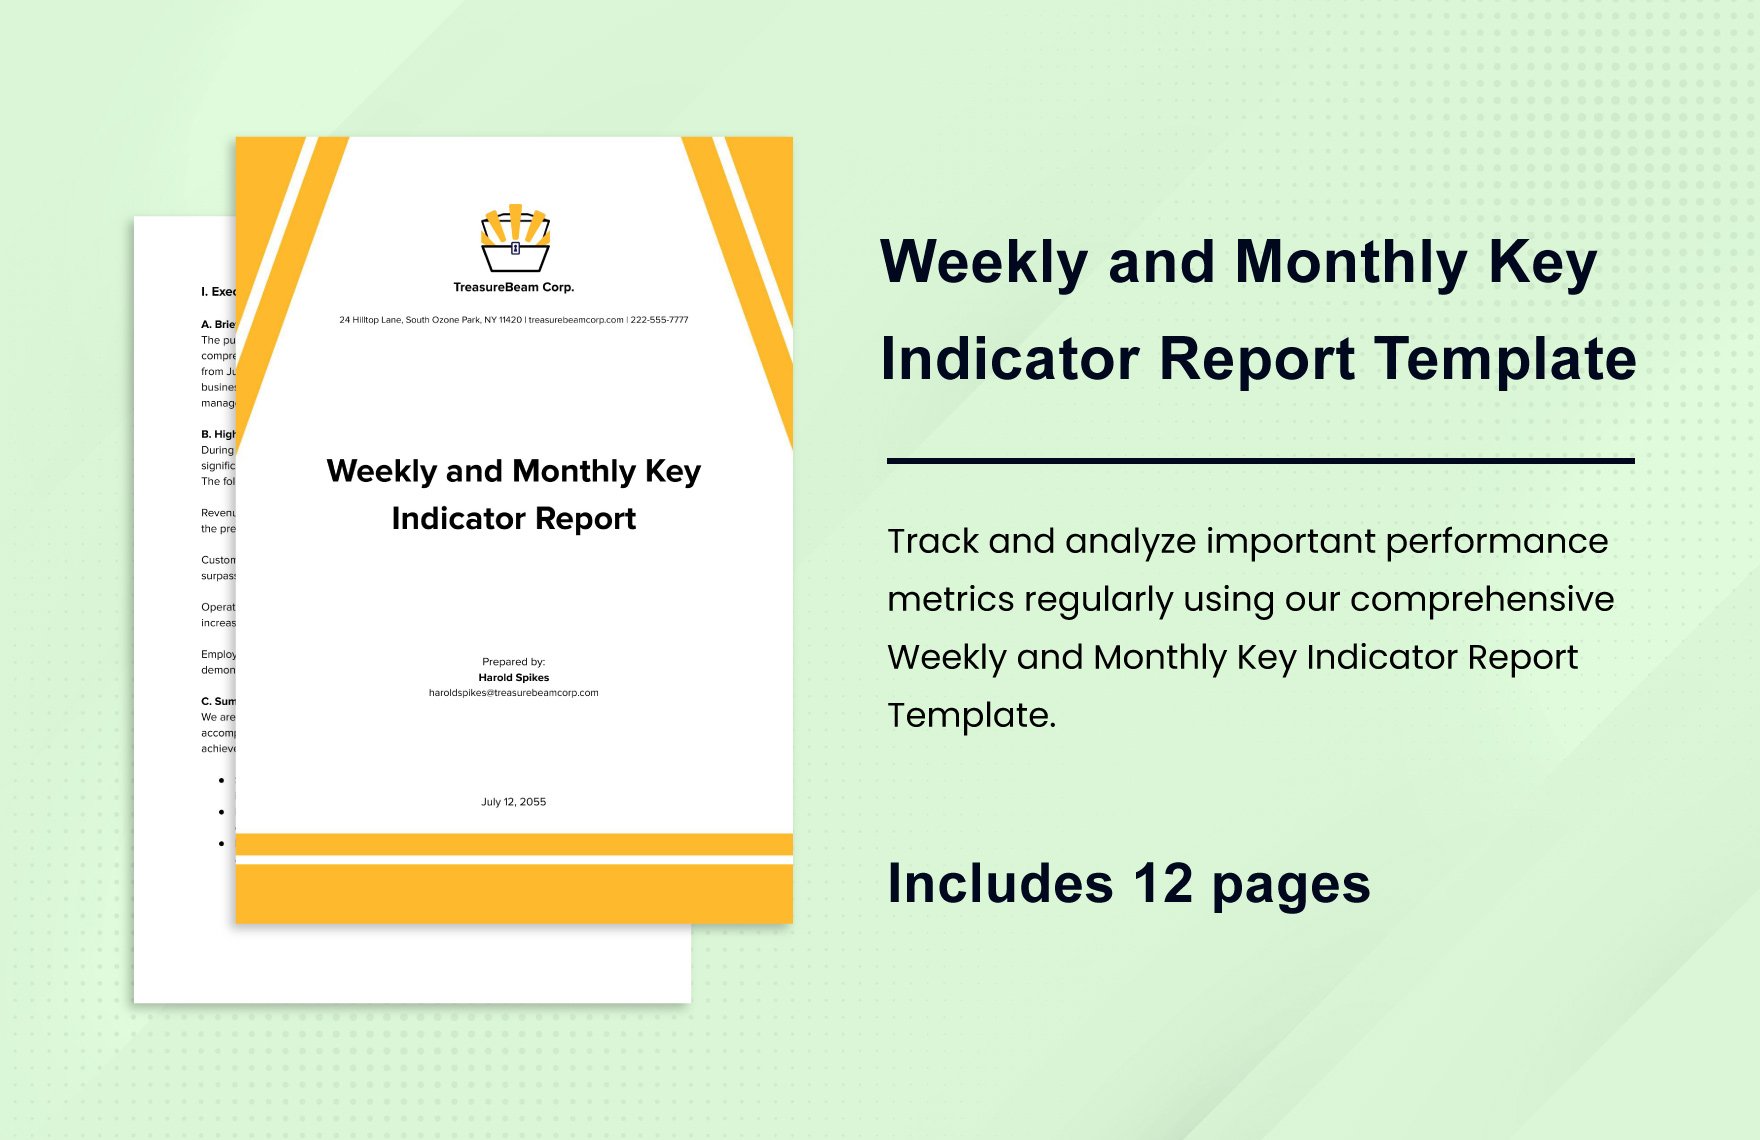 Weekly and Monthly Key Indicator Report Template